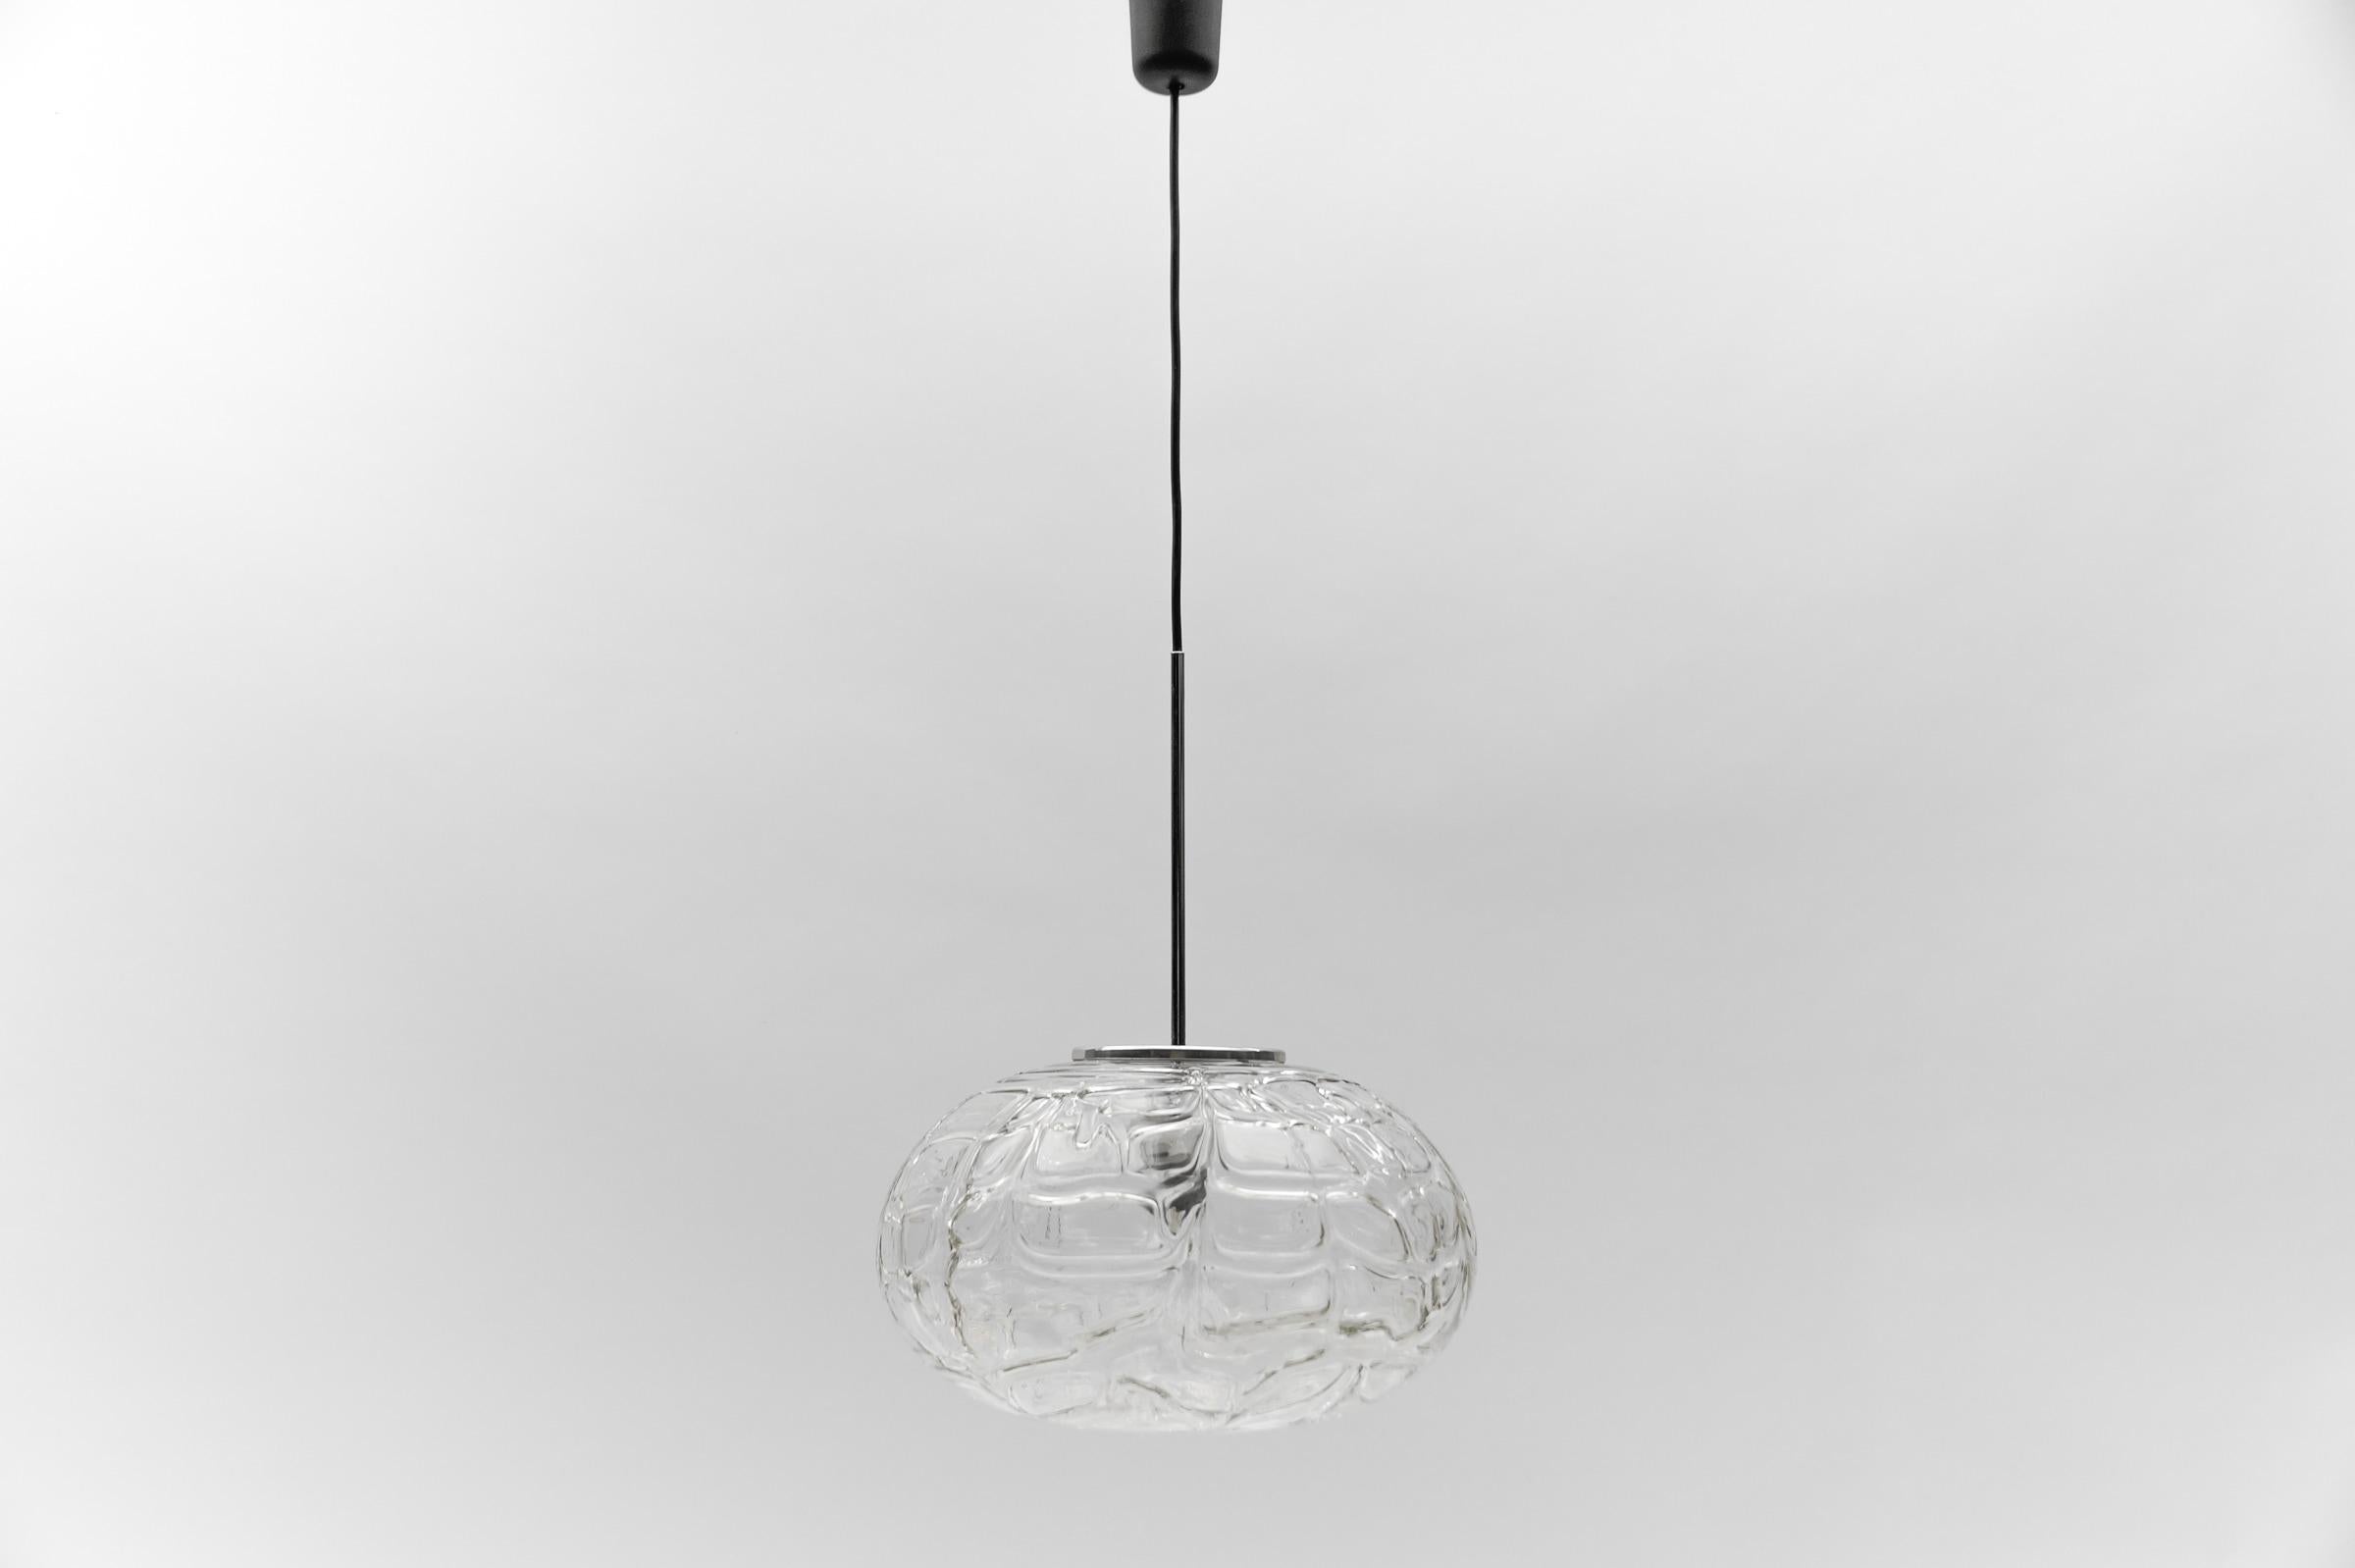 Large Oval Murano Clear Glass Ball Pendant Lamp by Doria, 1960s Germany

Dimensions
Diameter: 14.96 in. (38 cm)
Height: 37.40 in. (95 cm)

One E27 socket. Works with 220V and 110V.

Our lamps are checked, cleaned and are suitable for use in the USA.